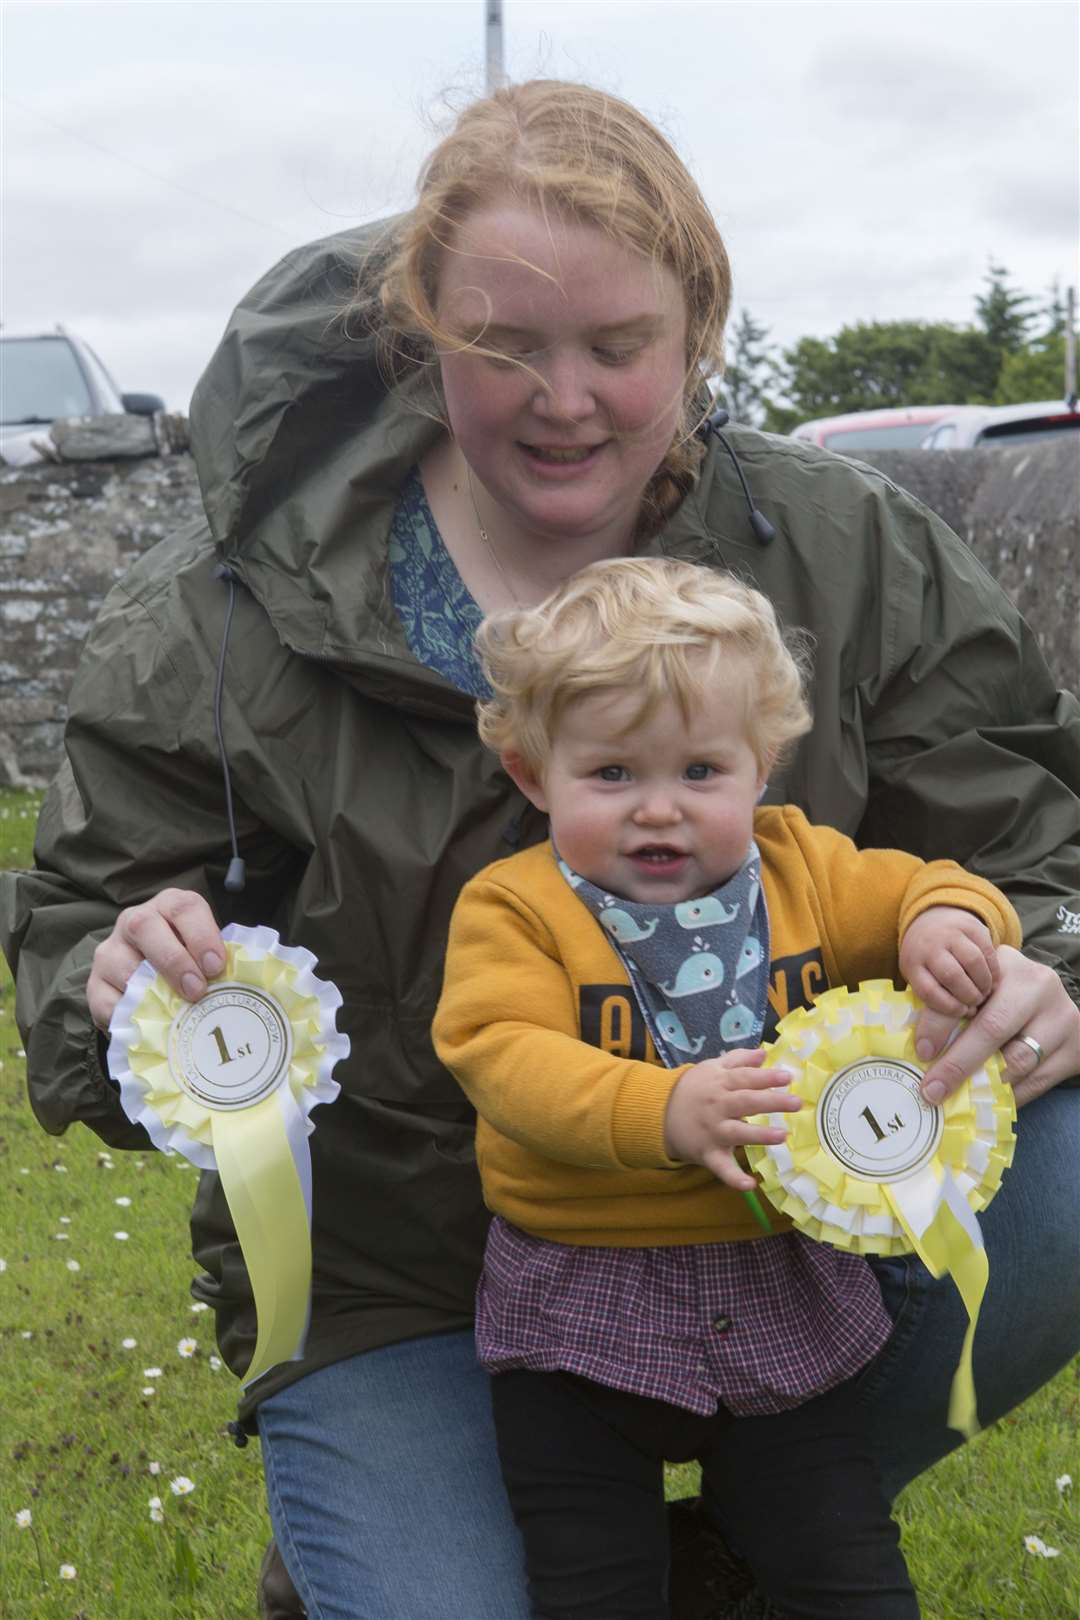 Eleven-month-old Ruaraidh Sheales, Forse House, seen here with mum, Ellie, won the baby show. Picture: Robert MacDonald/Northern Studios